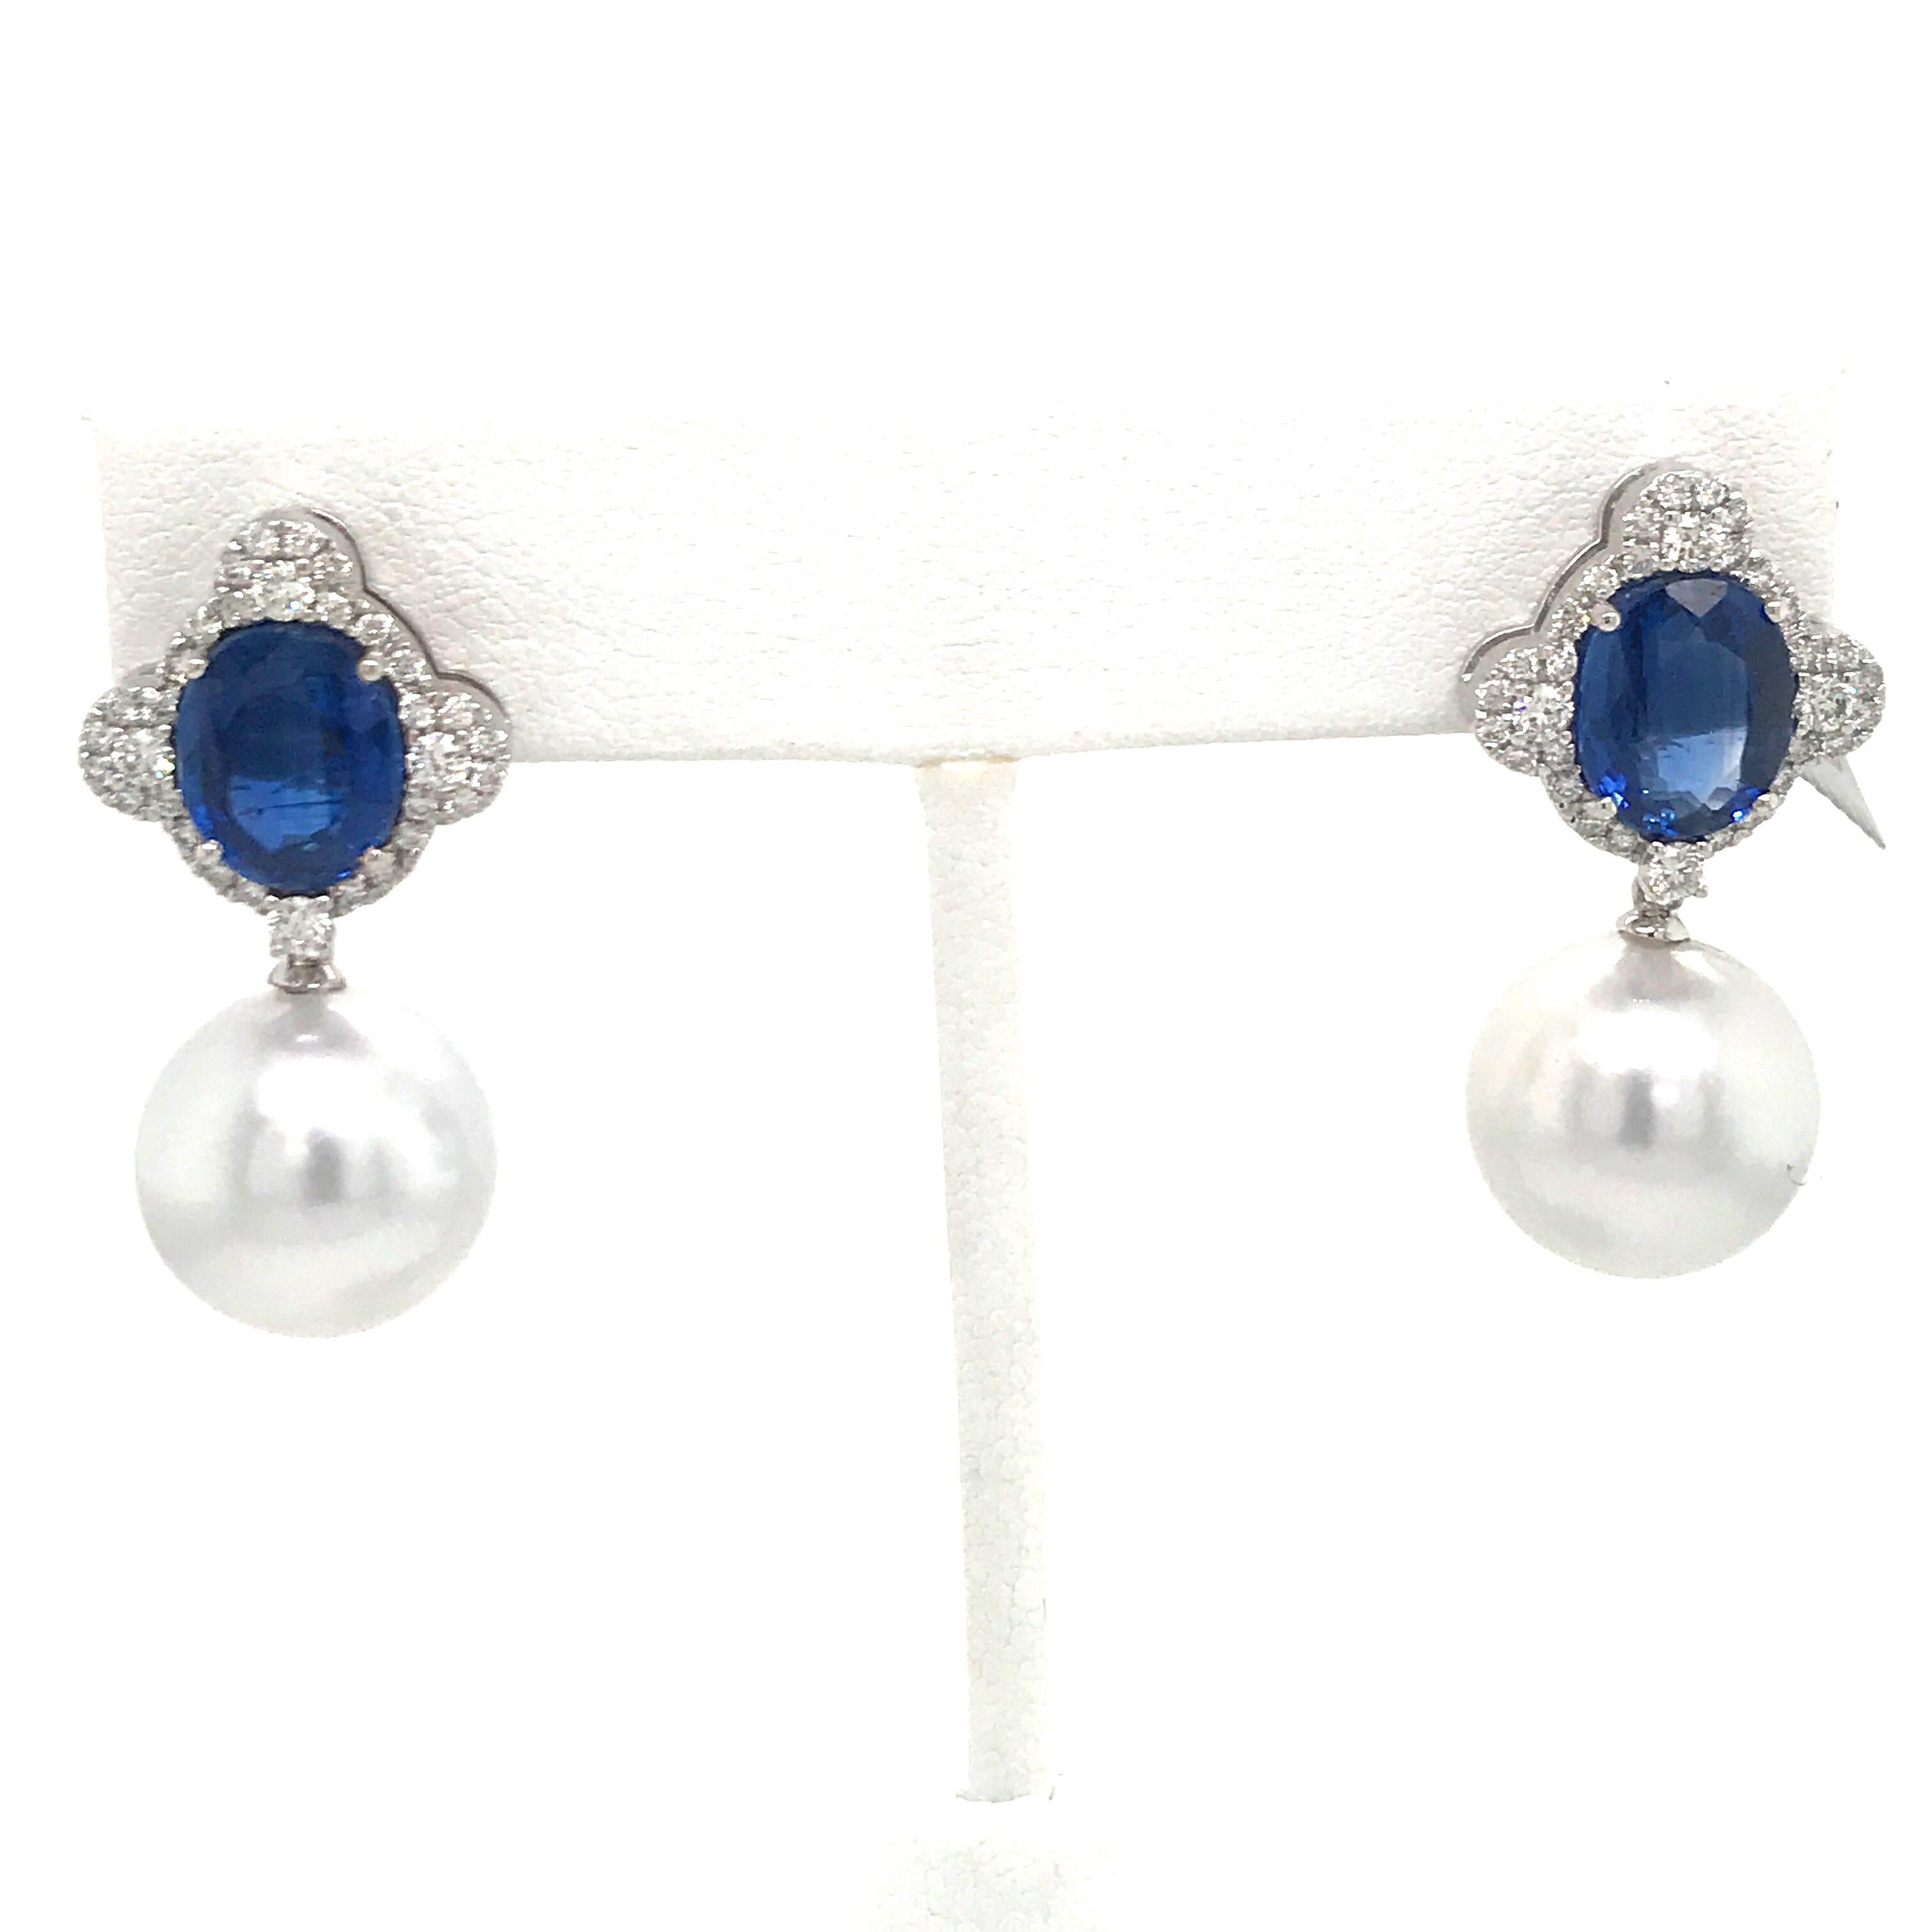 18K White gold earrings featuring two oval cut Kyanite weighing 6.50 carats flanked with 64 round diamonds, 0.75 carats with two South Sea Pearls measuring 13-14 mm.